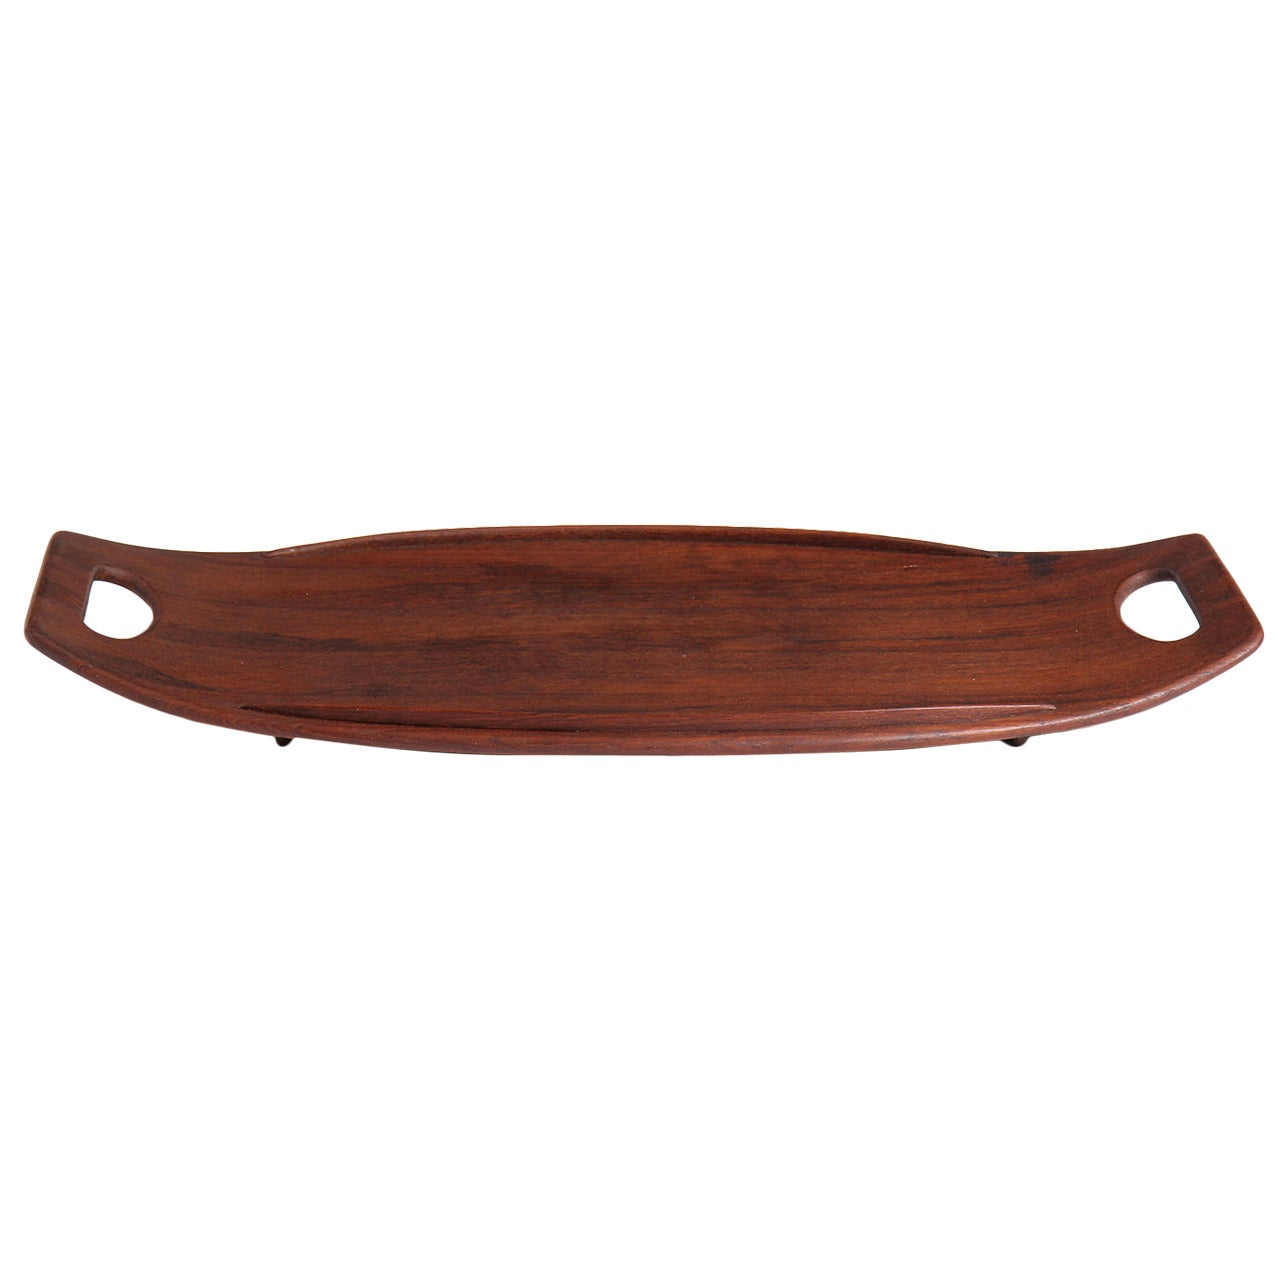 Rosewood Serving Tray by Jens Quistgaard